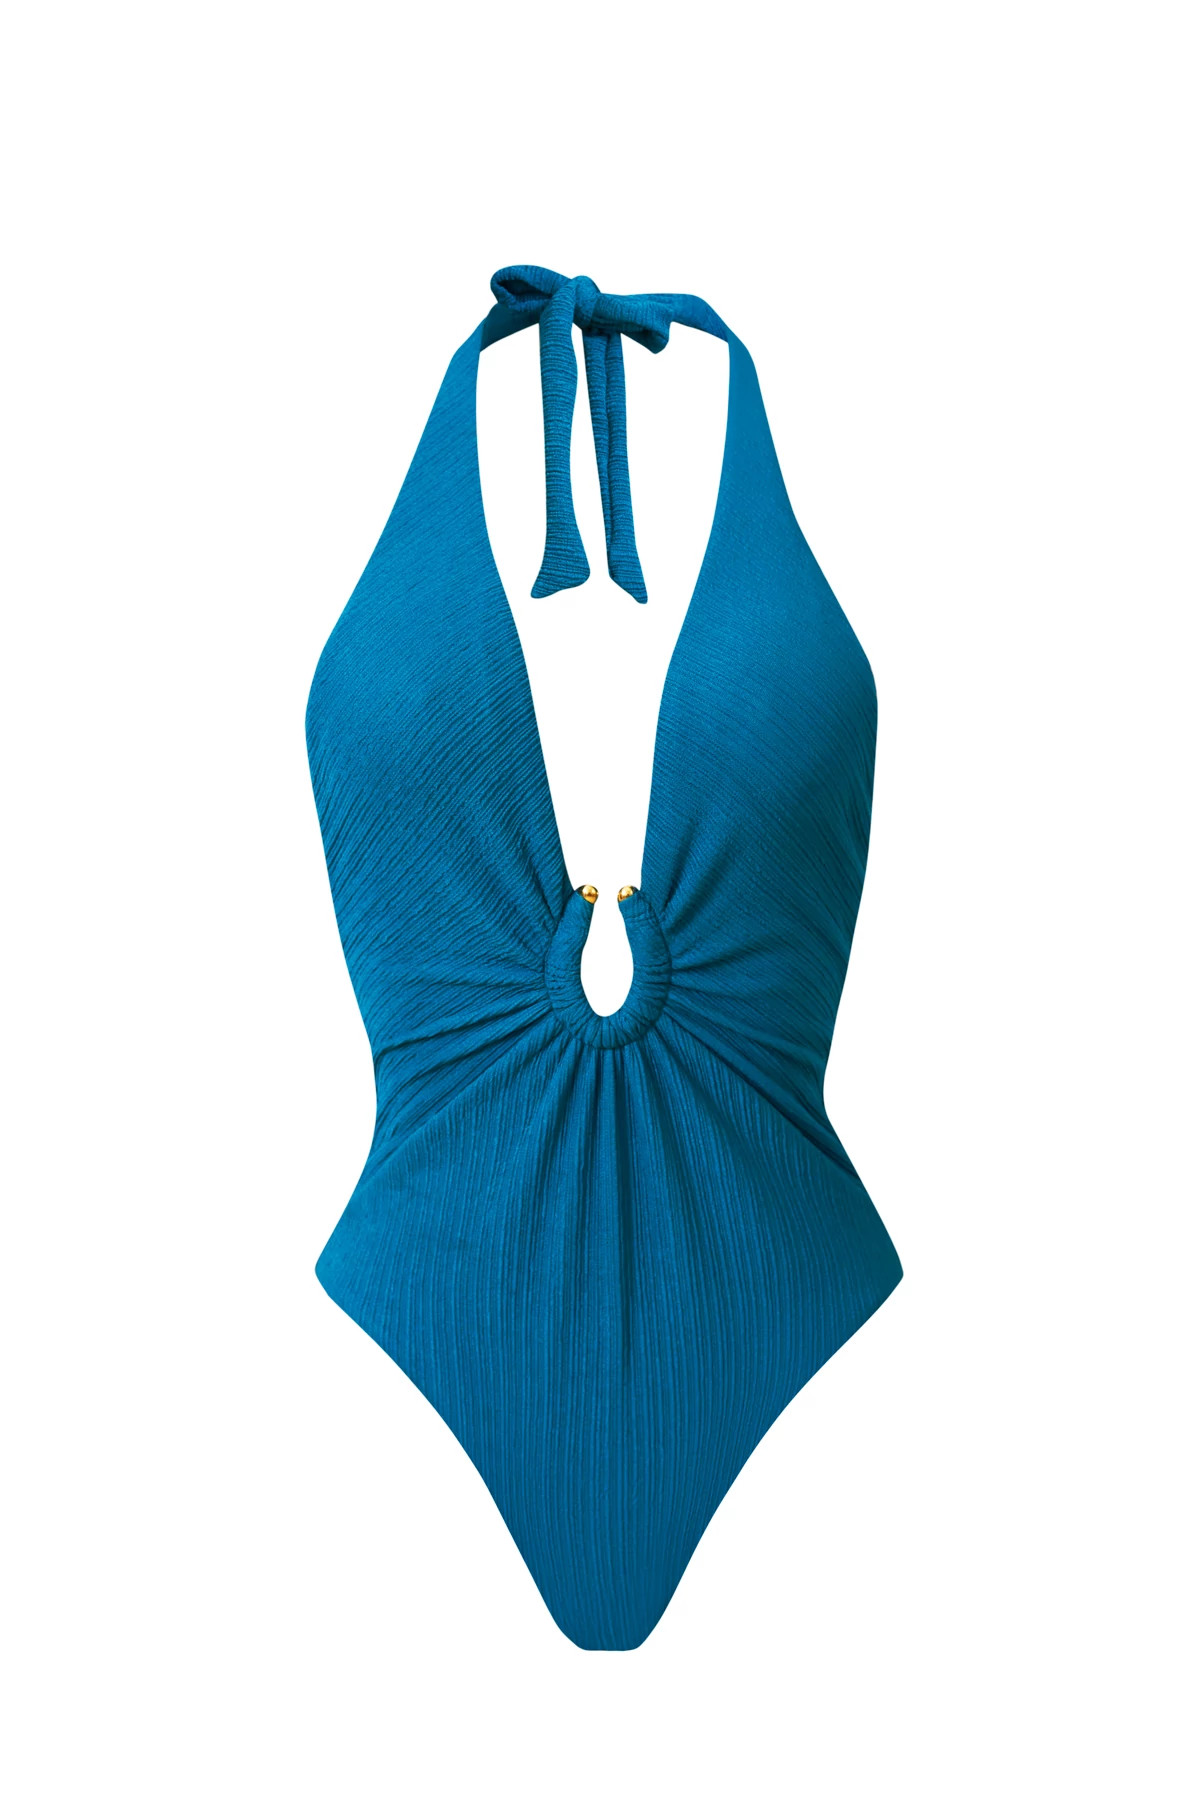 TURQUOISE TIDES Halter One Piece Swimsuit image number 4